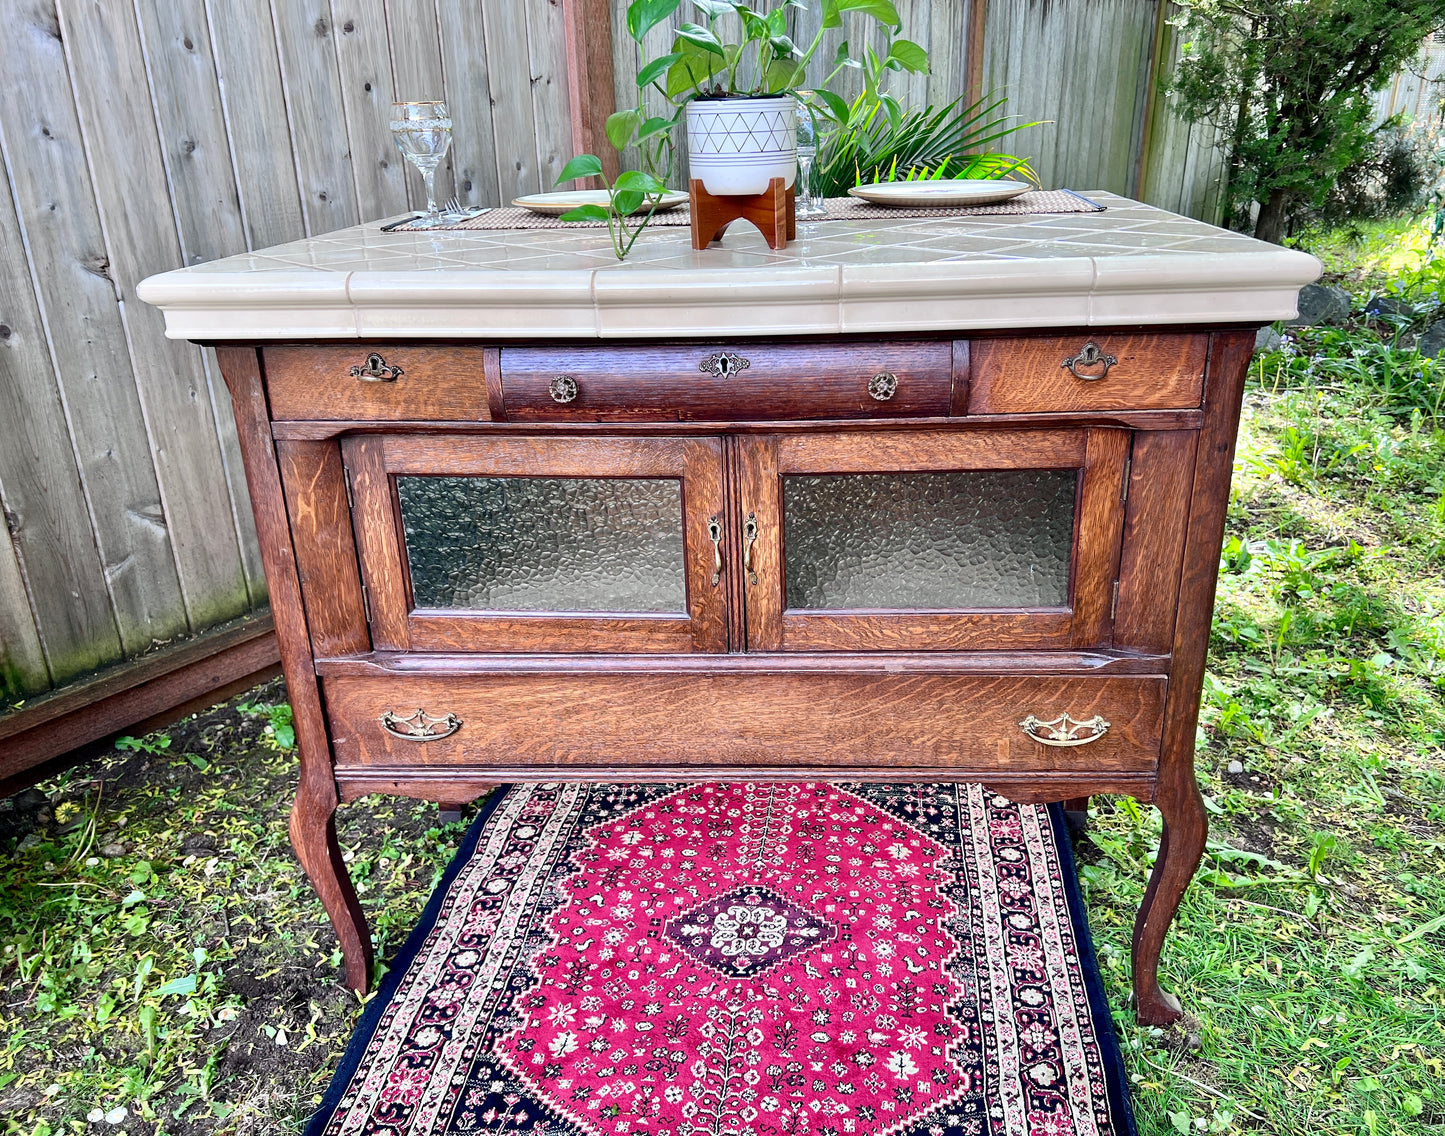 This is a unique antique wooden hutch with a cream colored tiled top that could used as a kitchen island